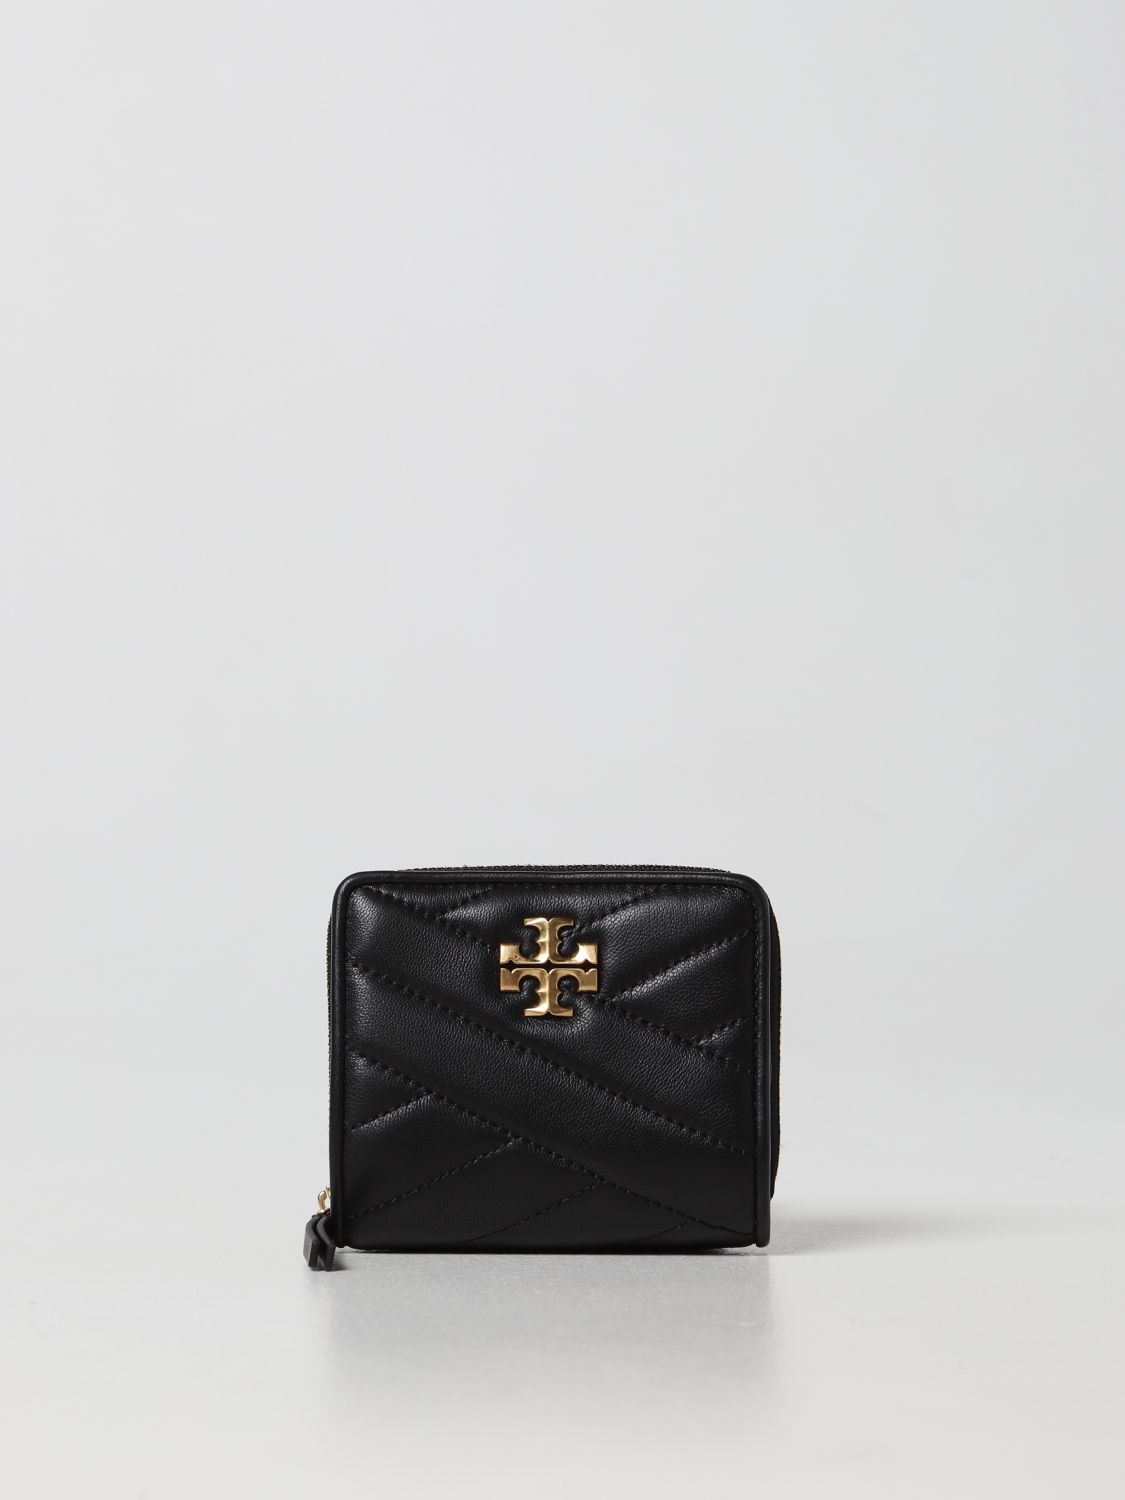 Tory Burch Outlet: wallet for woman - Black | Tory Burch wallet 90344  online on 